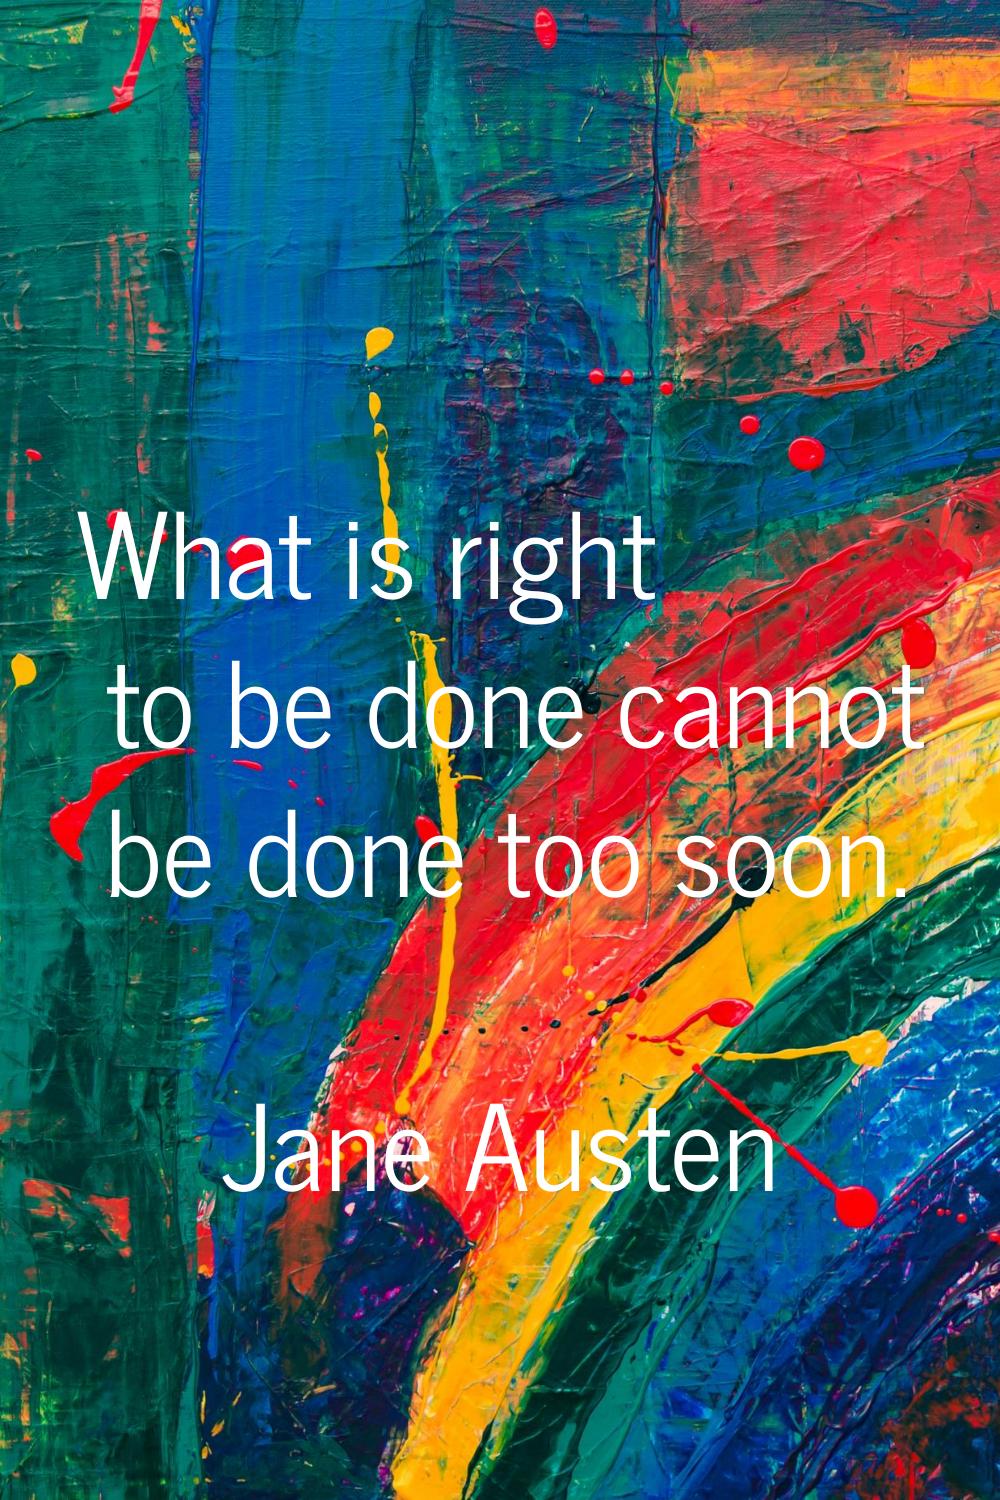 What is right to be done cannot be done too soon.